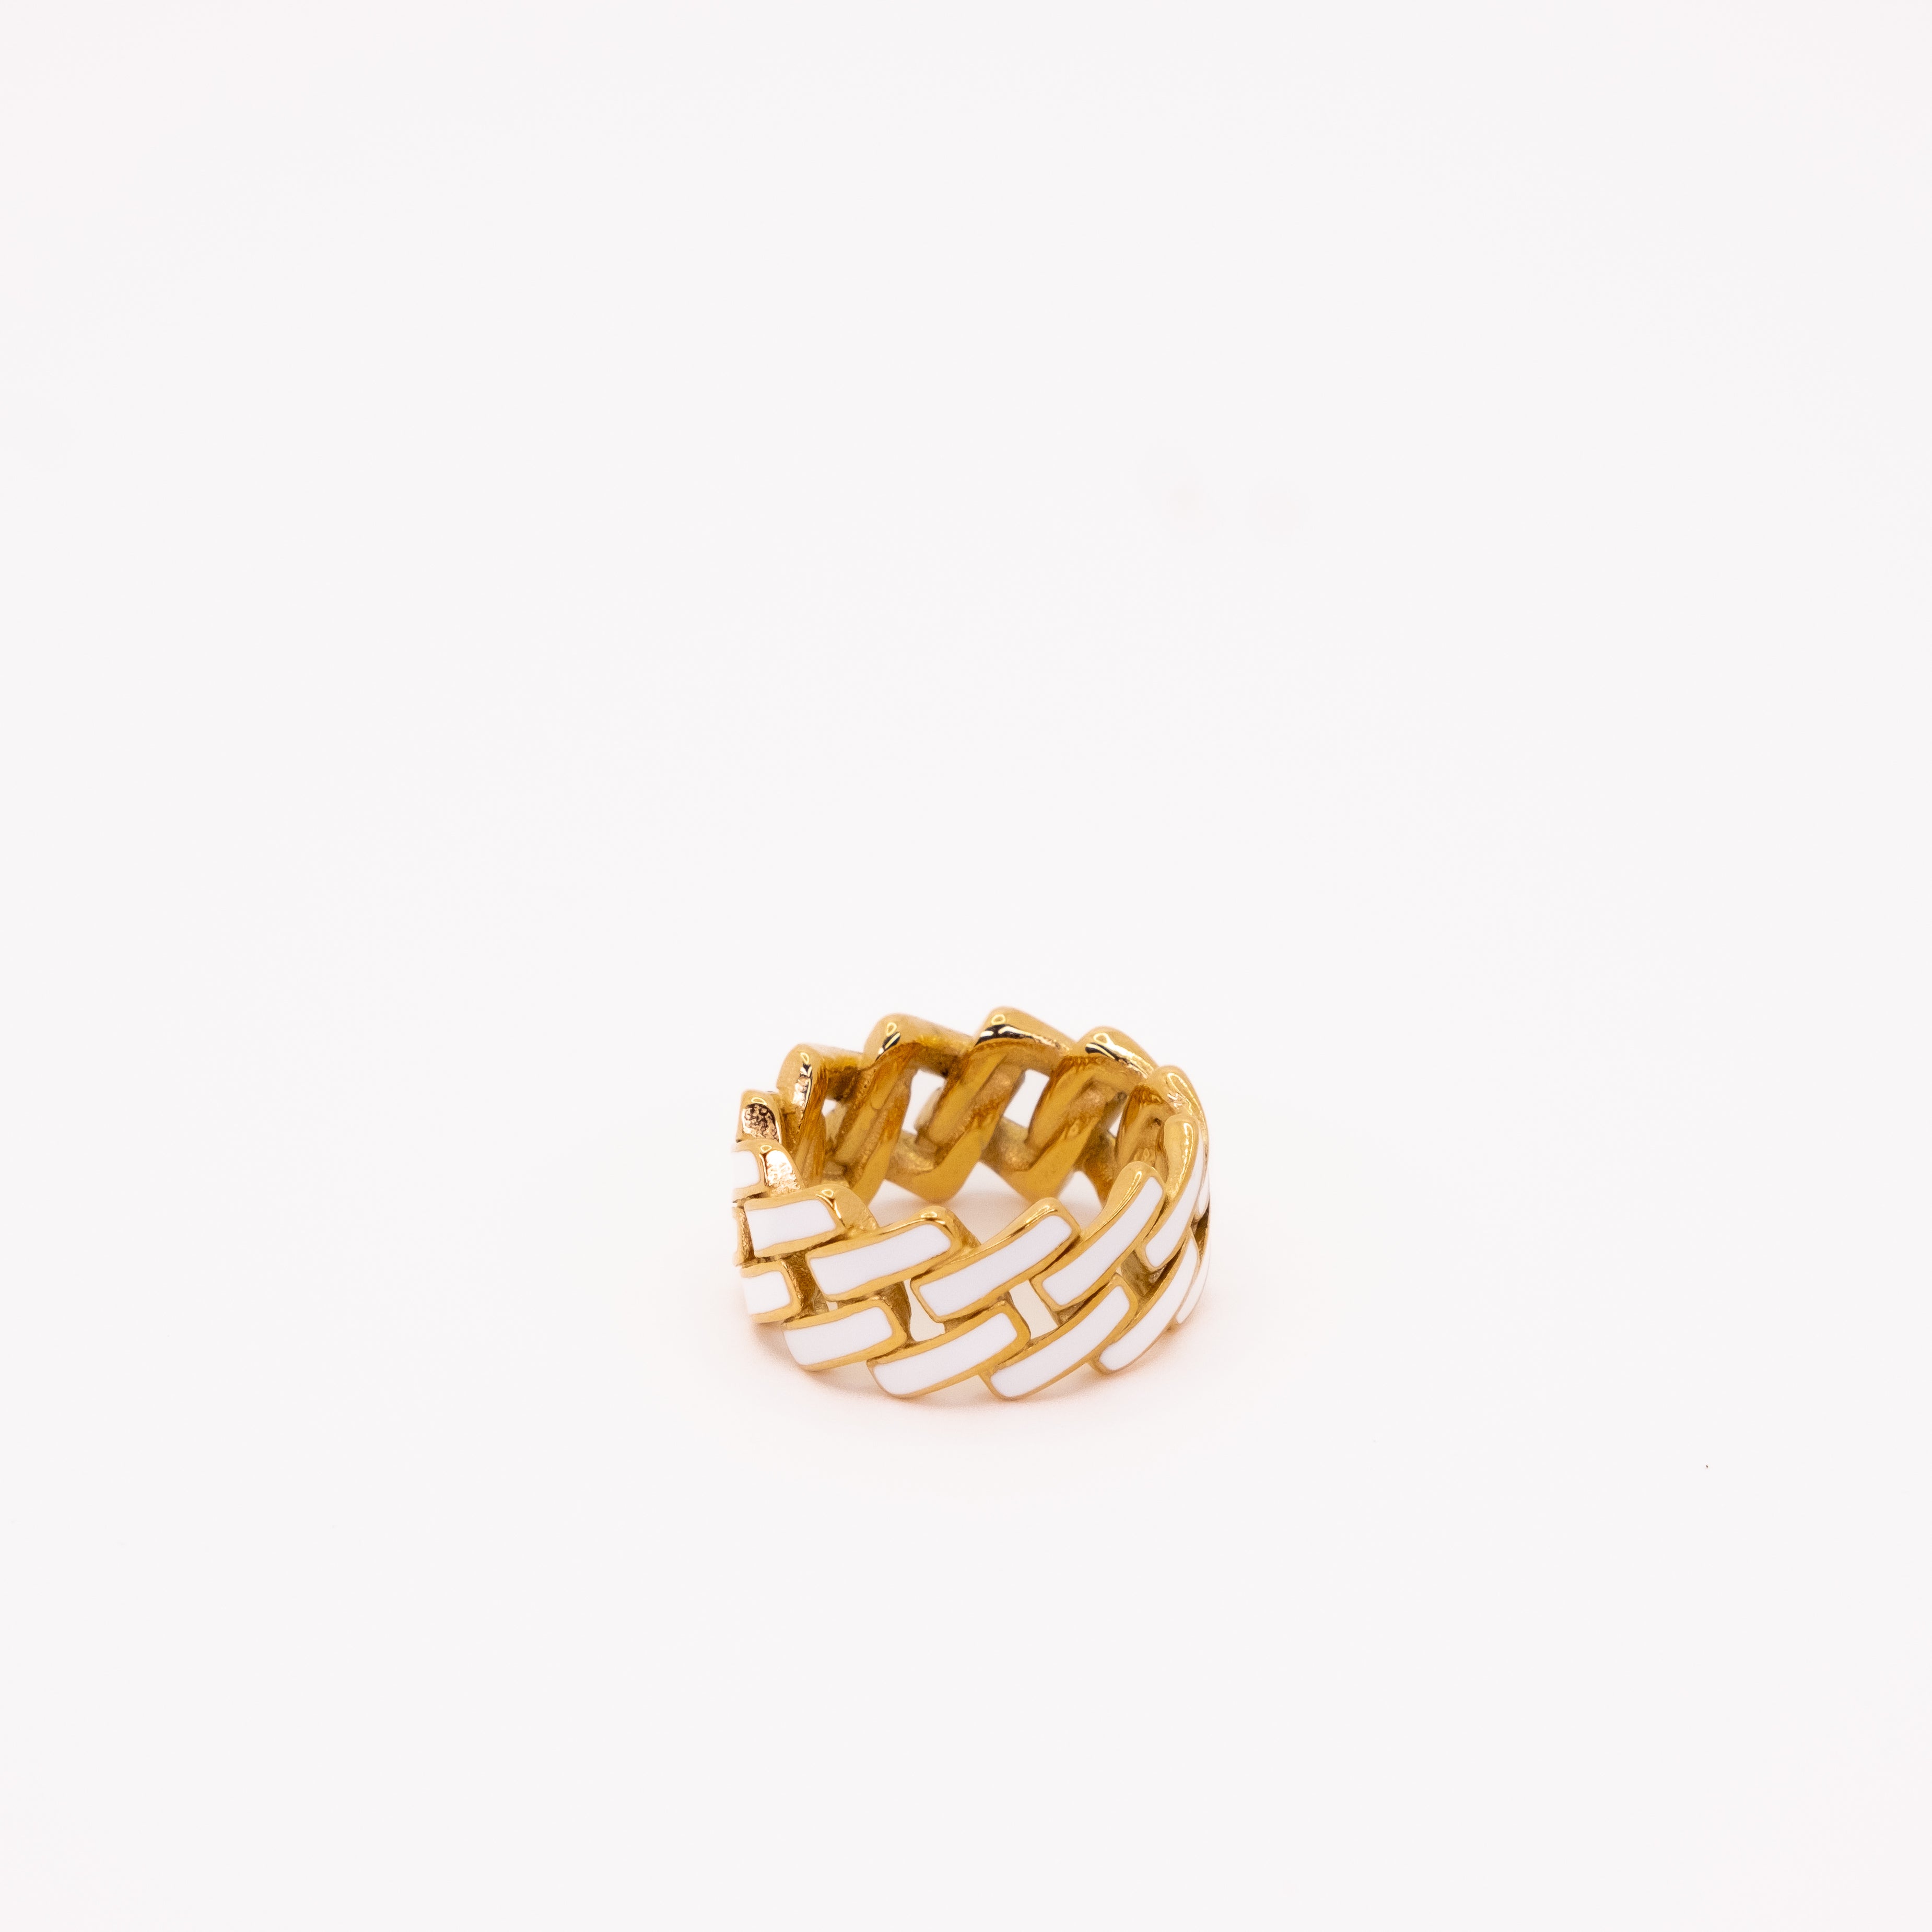 "Bound to you" Ring